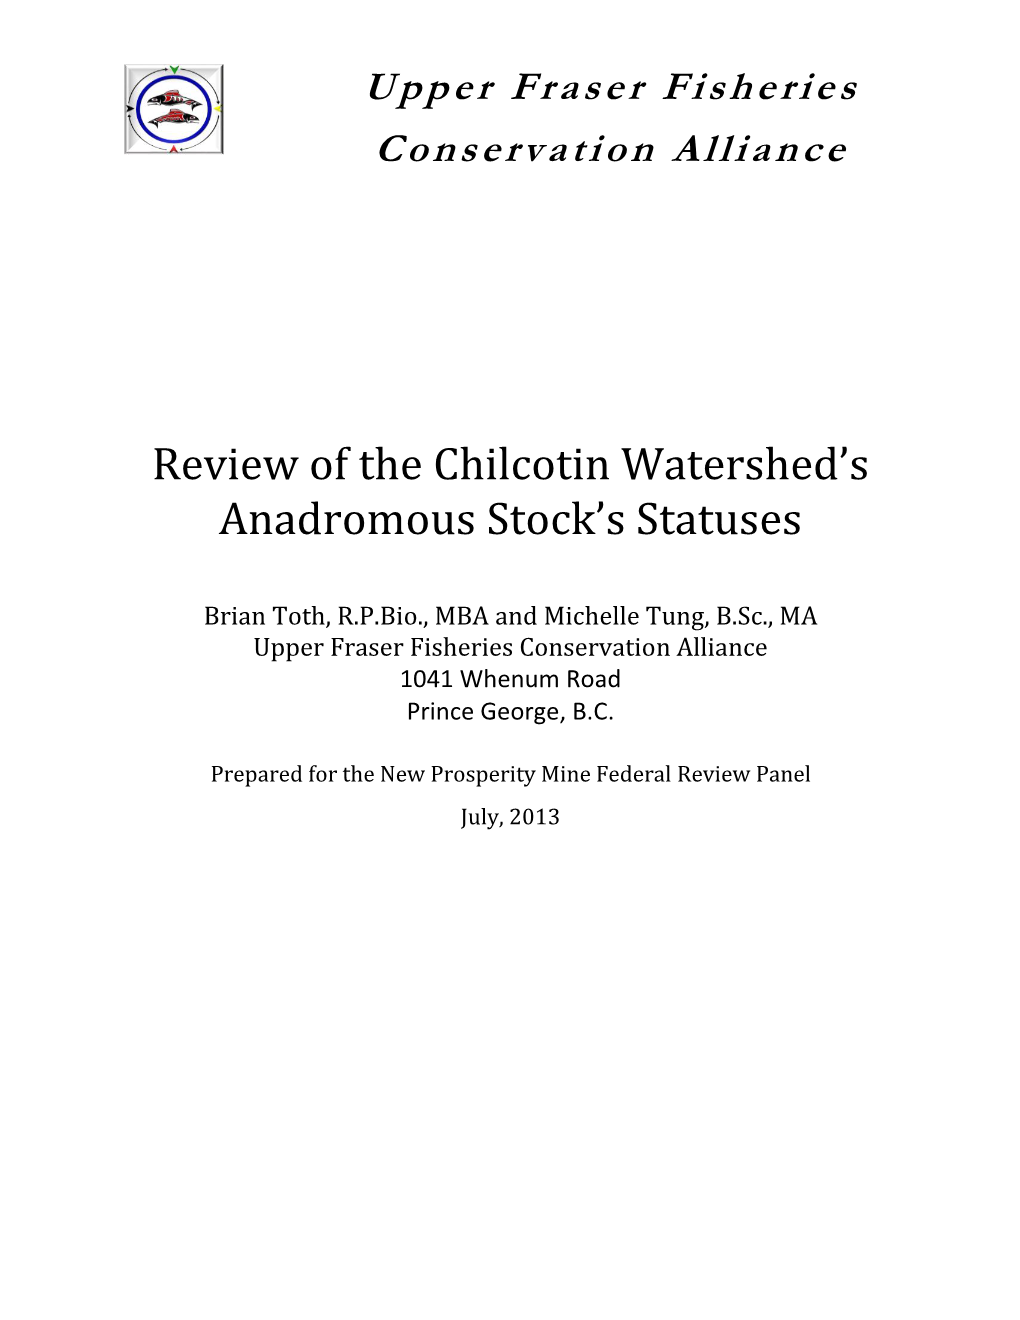 Review of the Chilcotin Watershed's Anadromous Stock's Statuses